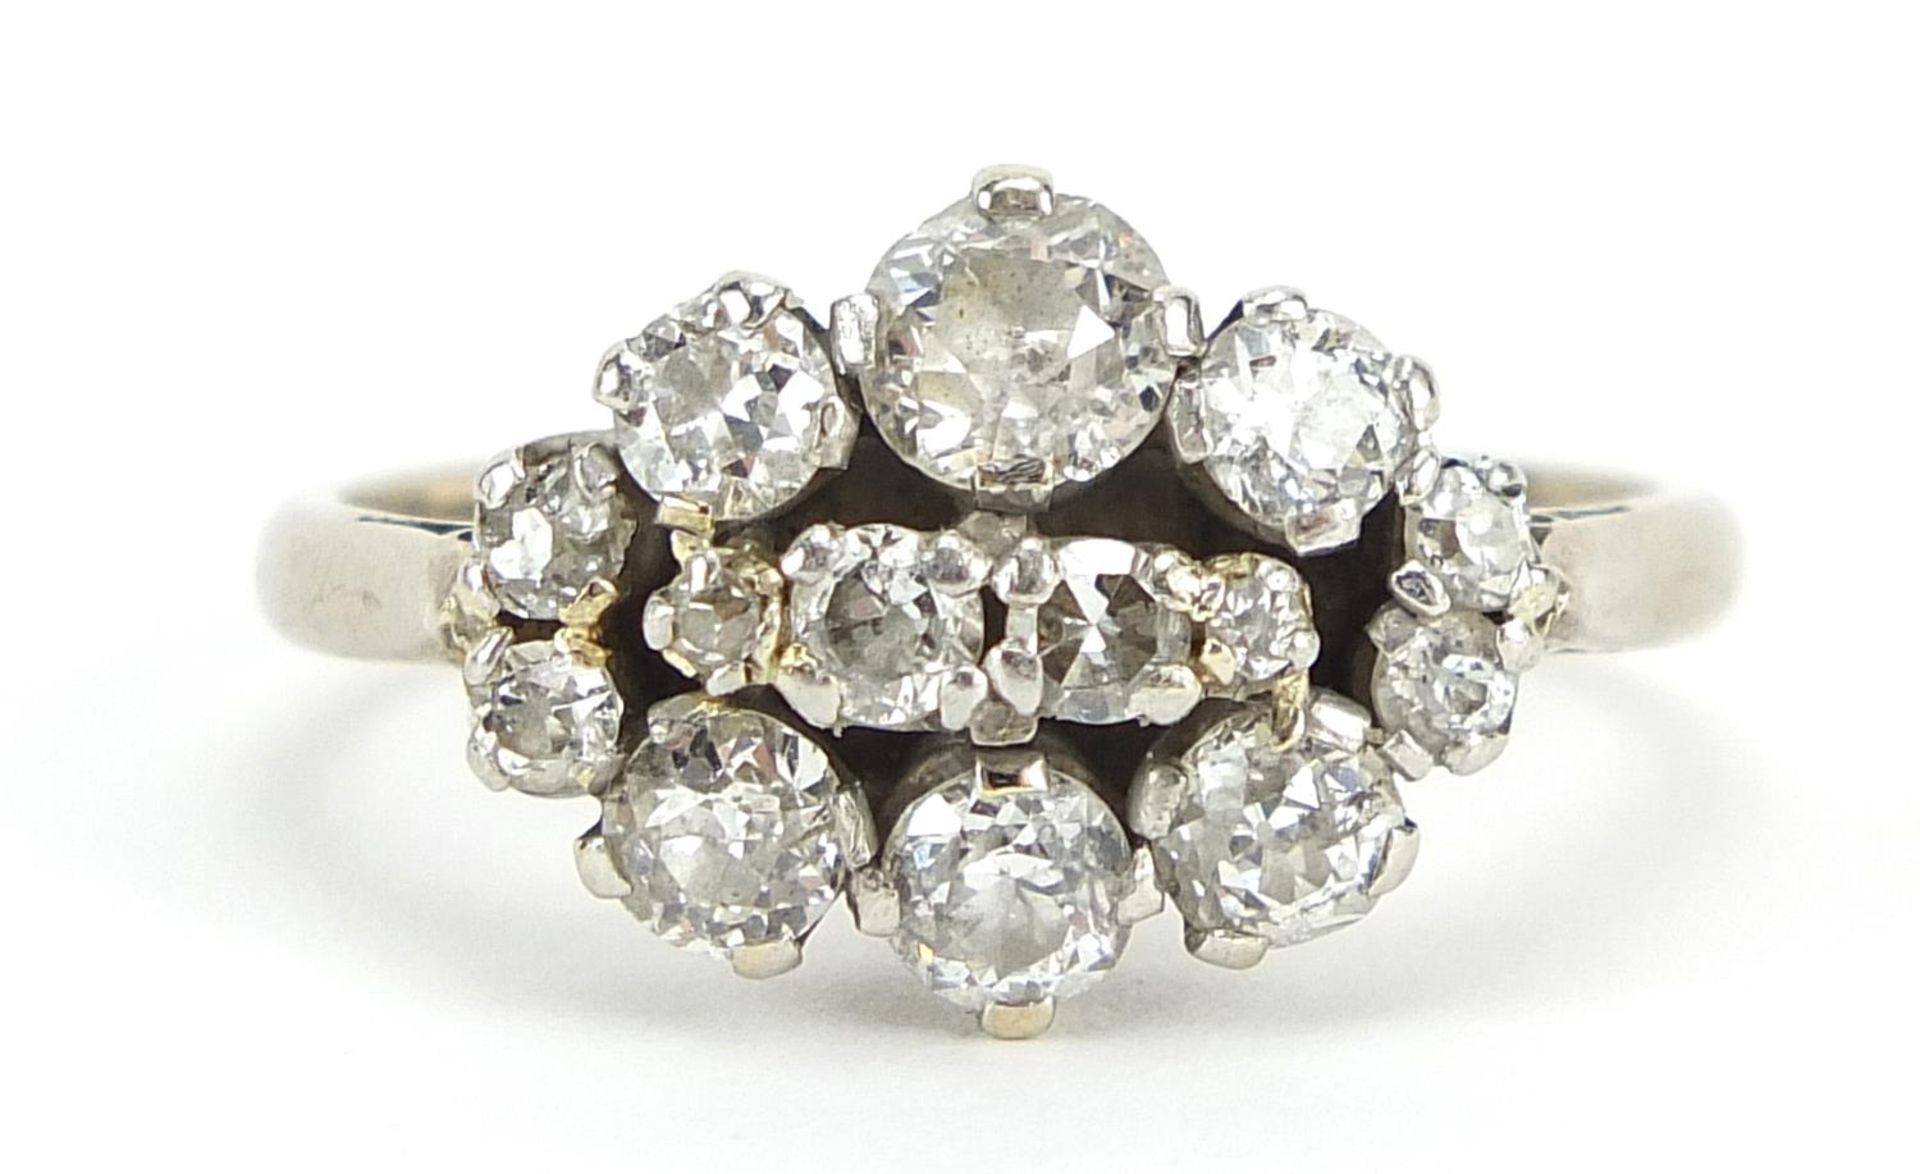 18ct white gold and platinum diamond cluster ring, the largest diamond approximately 0.34ct, size M,